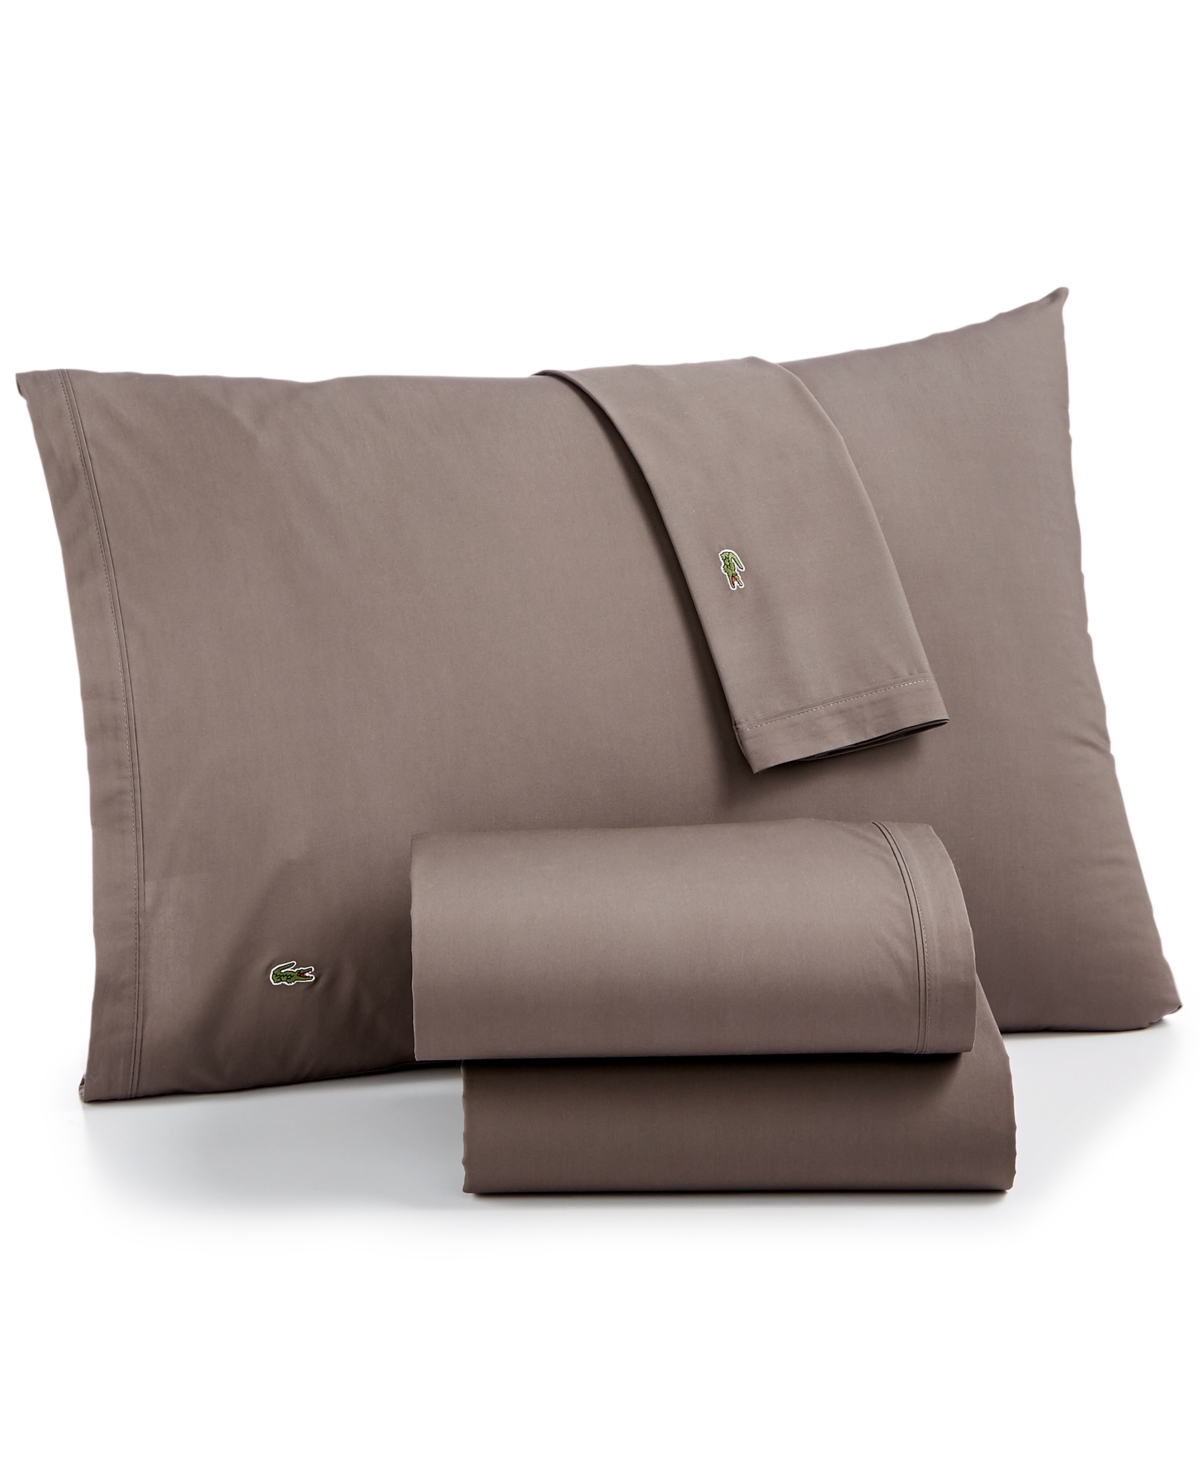 Lacoste Home Solid Cotton Percale Sheet Set, King In Dark Gray